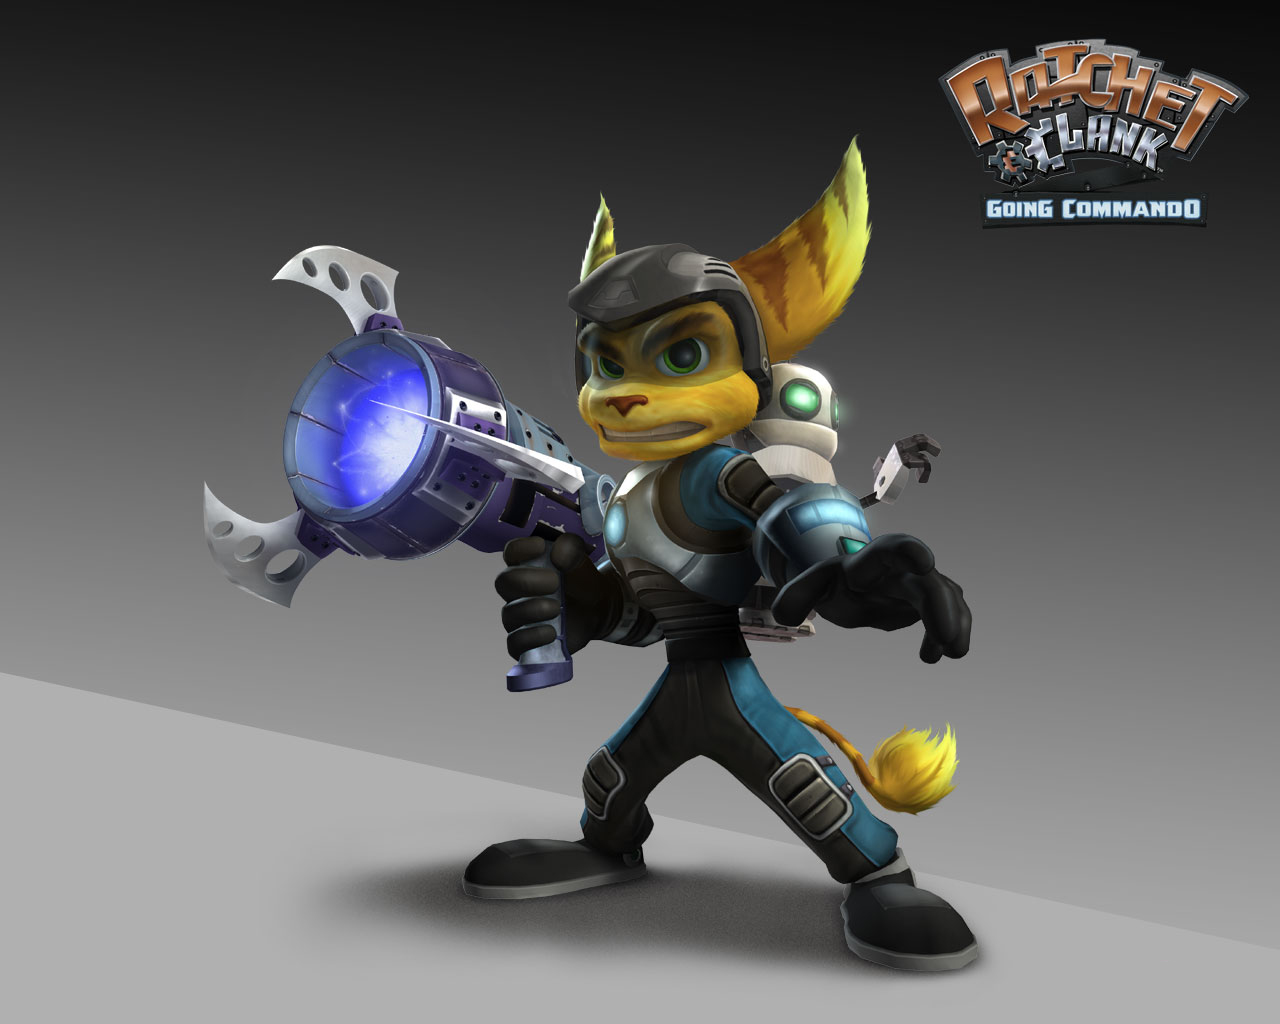  Ratchet and Clank Going Commando Collection